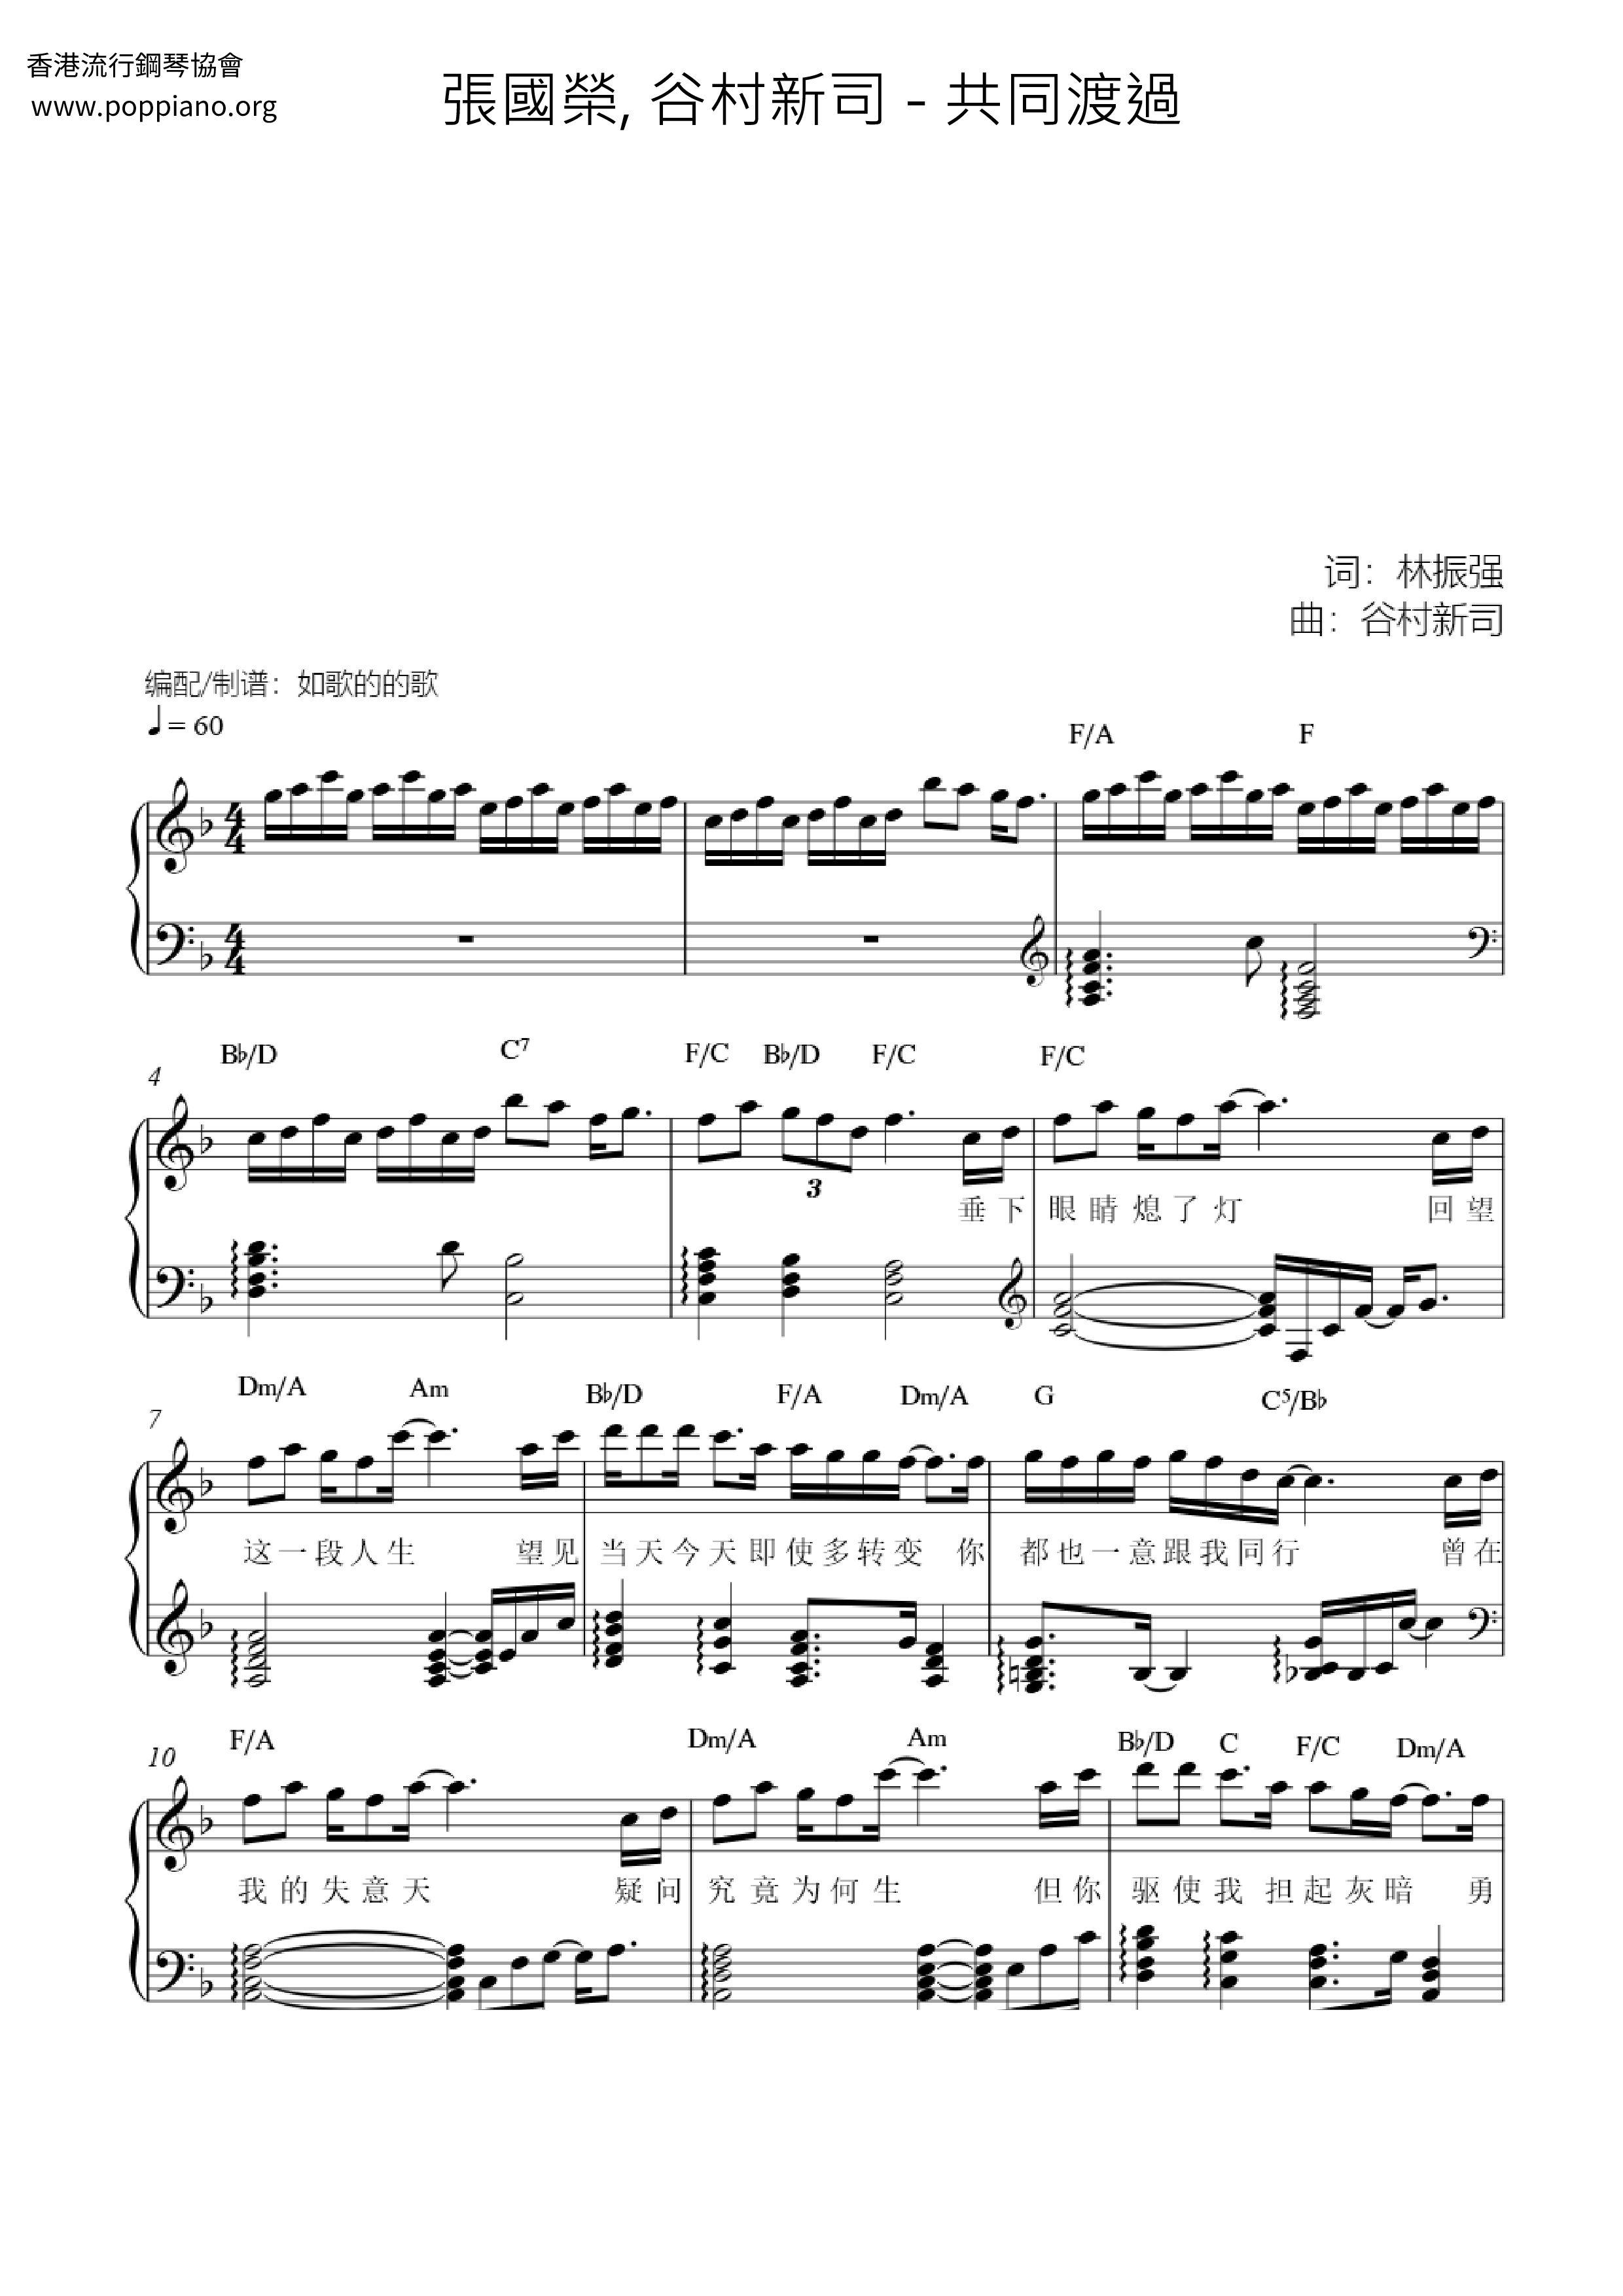 Together Score